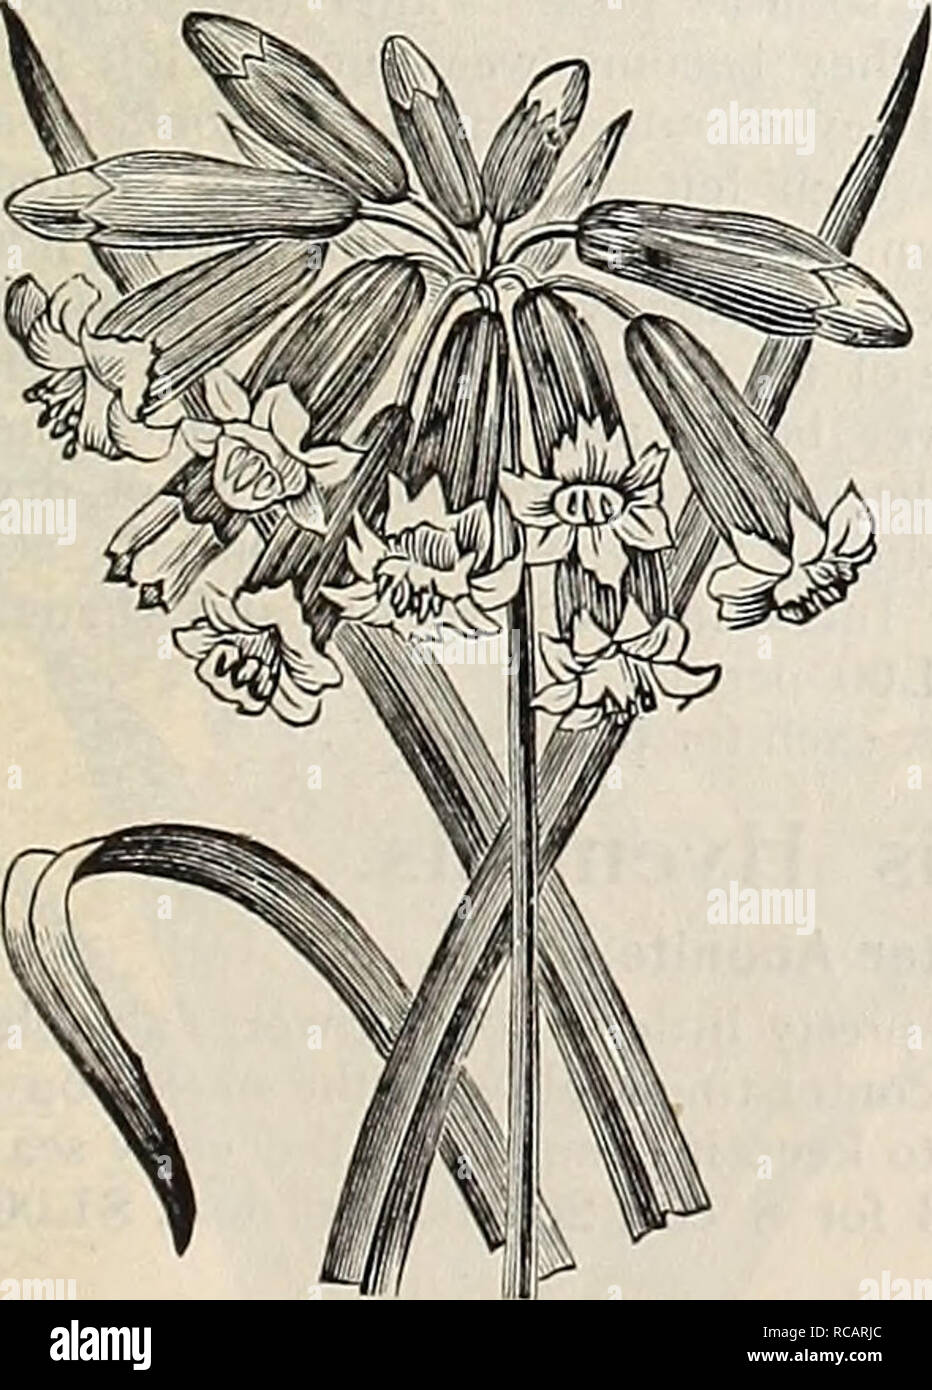 . Dreer's autumn catalogue : 1896 bulbs, plants, seeds. Bulbs (Plants) Catalogs; Flowers Seeds Catalogs; Gardening Equipment and supplies Catalogs; Nurseries (Horticulture) Catalogs; Fruit Seeds Catalogs. Calochortus.. chionodoxa. ( Glory of the Snow.) BABIANA. A charming genus with leaves of darkest green, thickly covered with downy hairs, and bearing showy spikes of flowers. They should have the pro- tection of a cold-frame, and are very successfully grown in pots. Height, 6 to 9 inches. Mixed Varieties. 3 for 10 cts., 40 cts. per doz., §3.00 per 100. CALOCHORTUS. (Mariposa, or Butterfly Tul Stock Photo